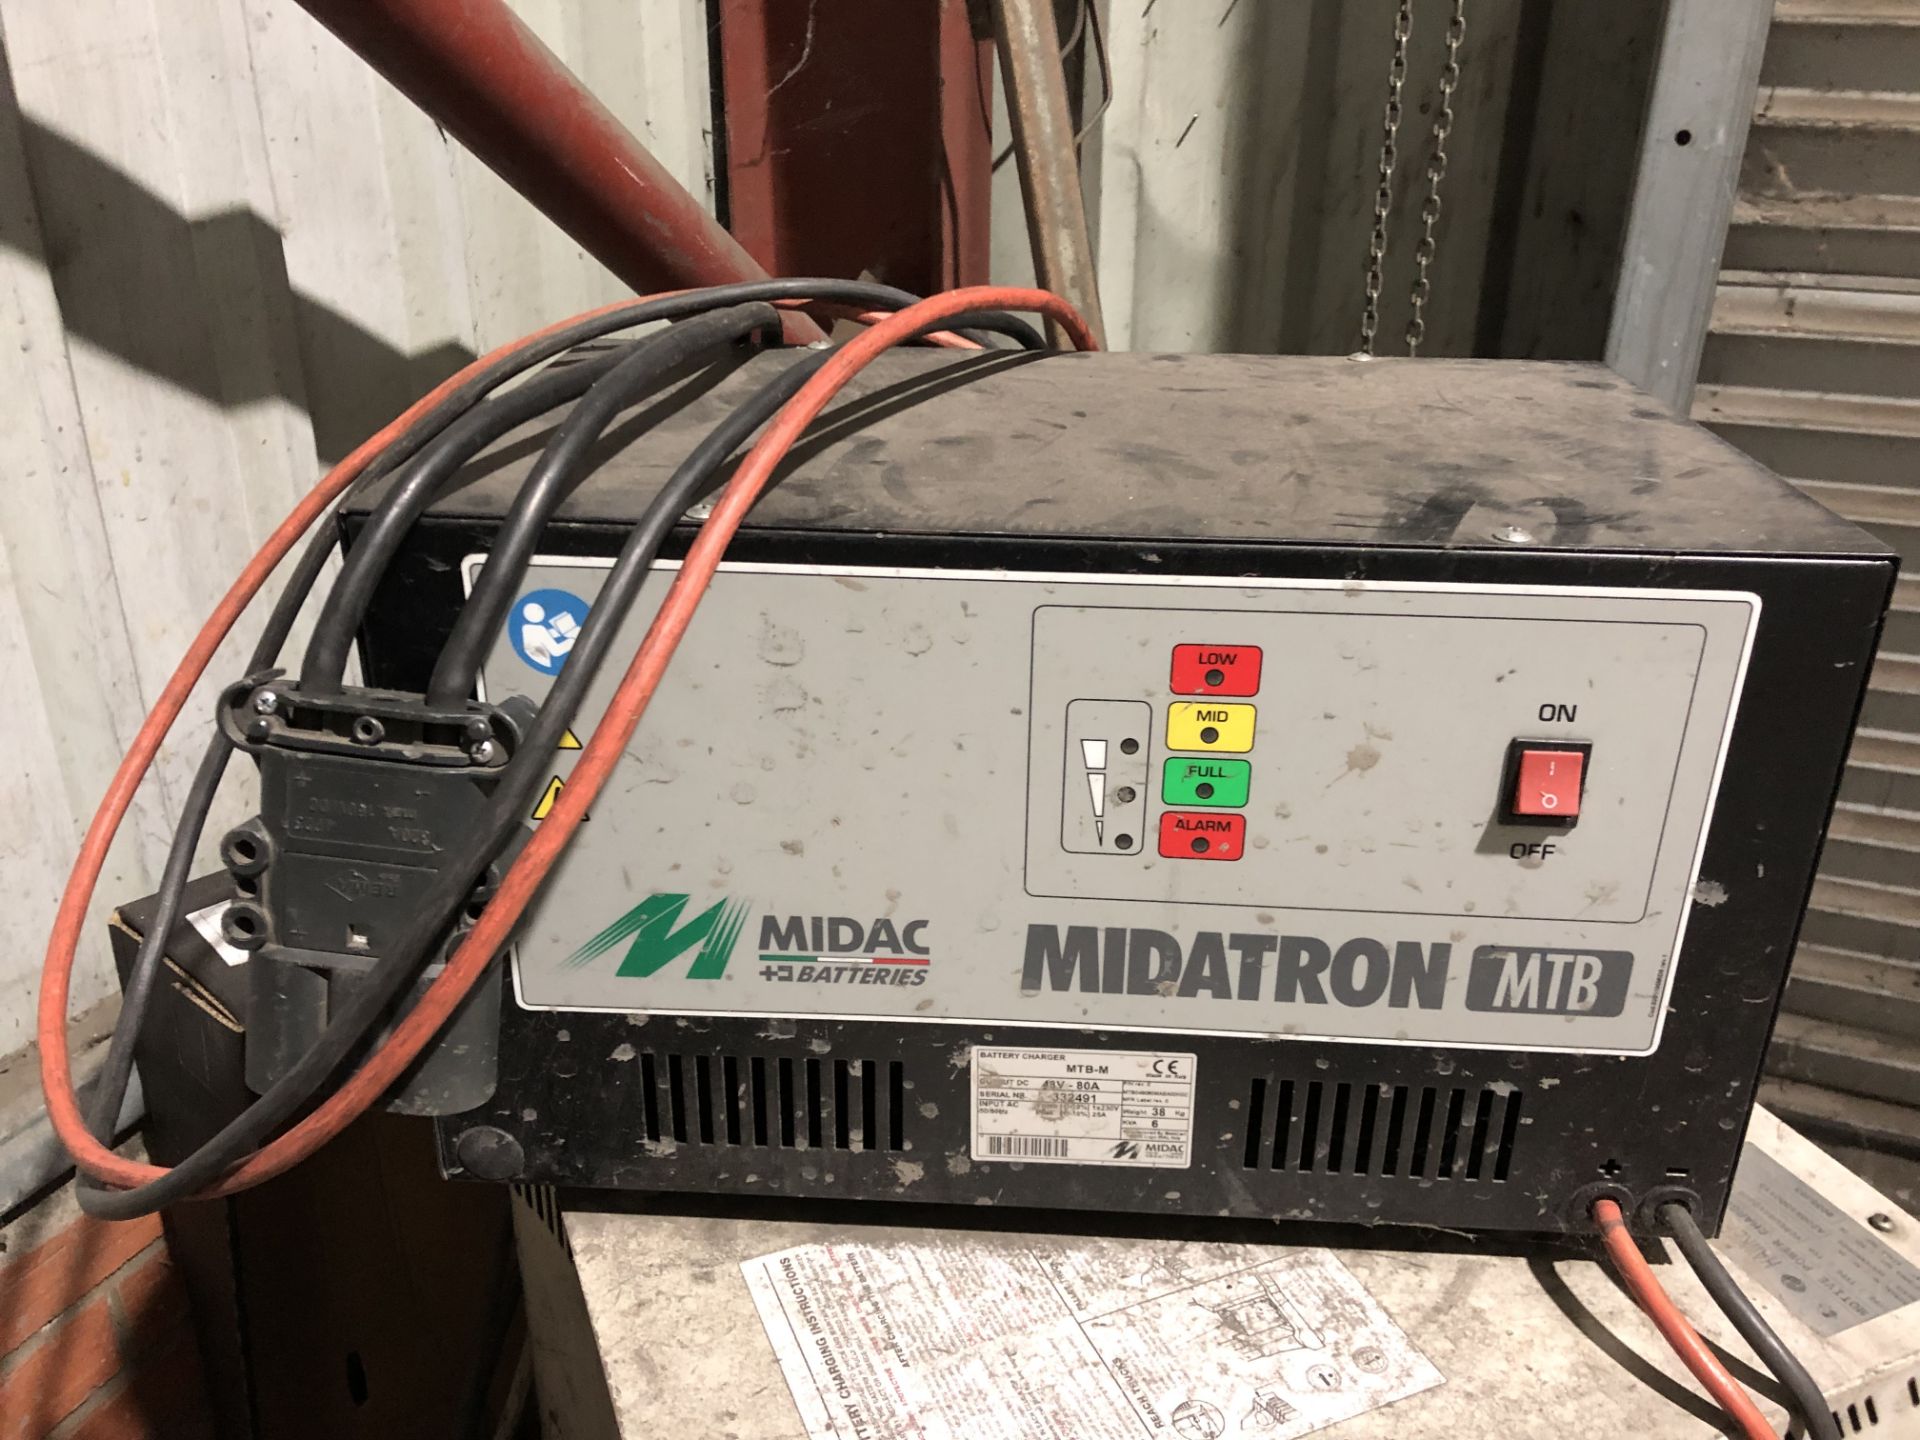 Midac Midatron MTB-M 48V 80A Forklift Battery Charger